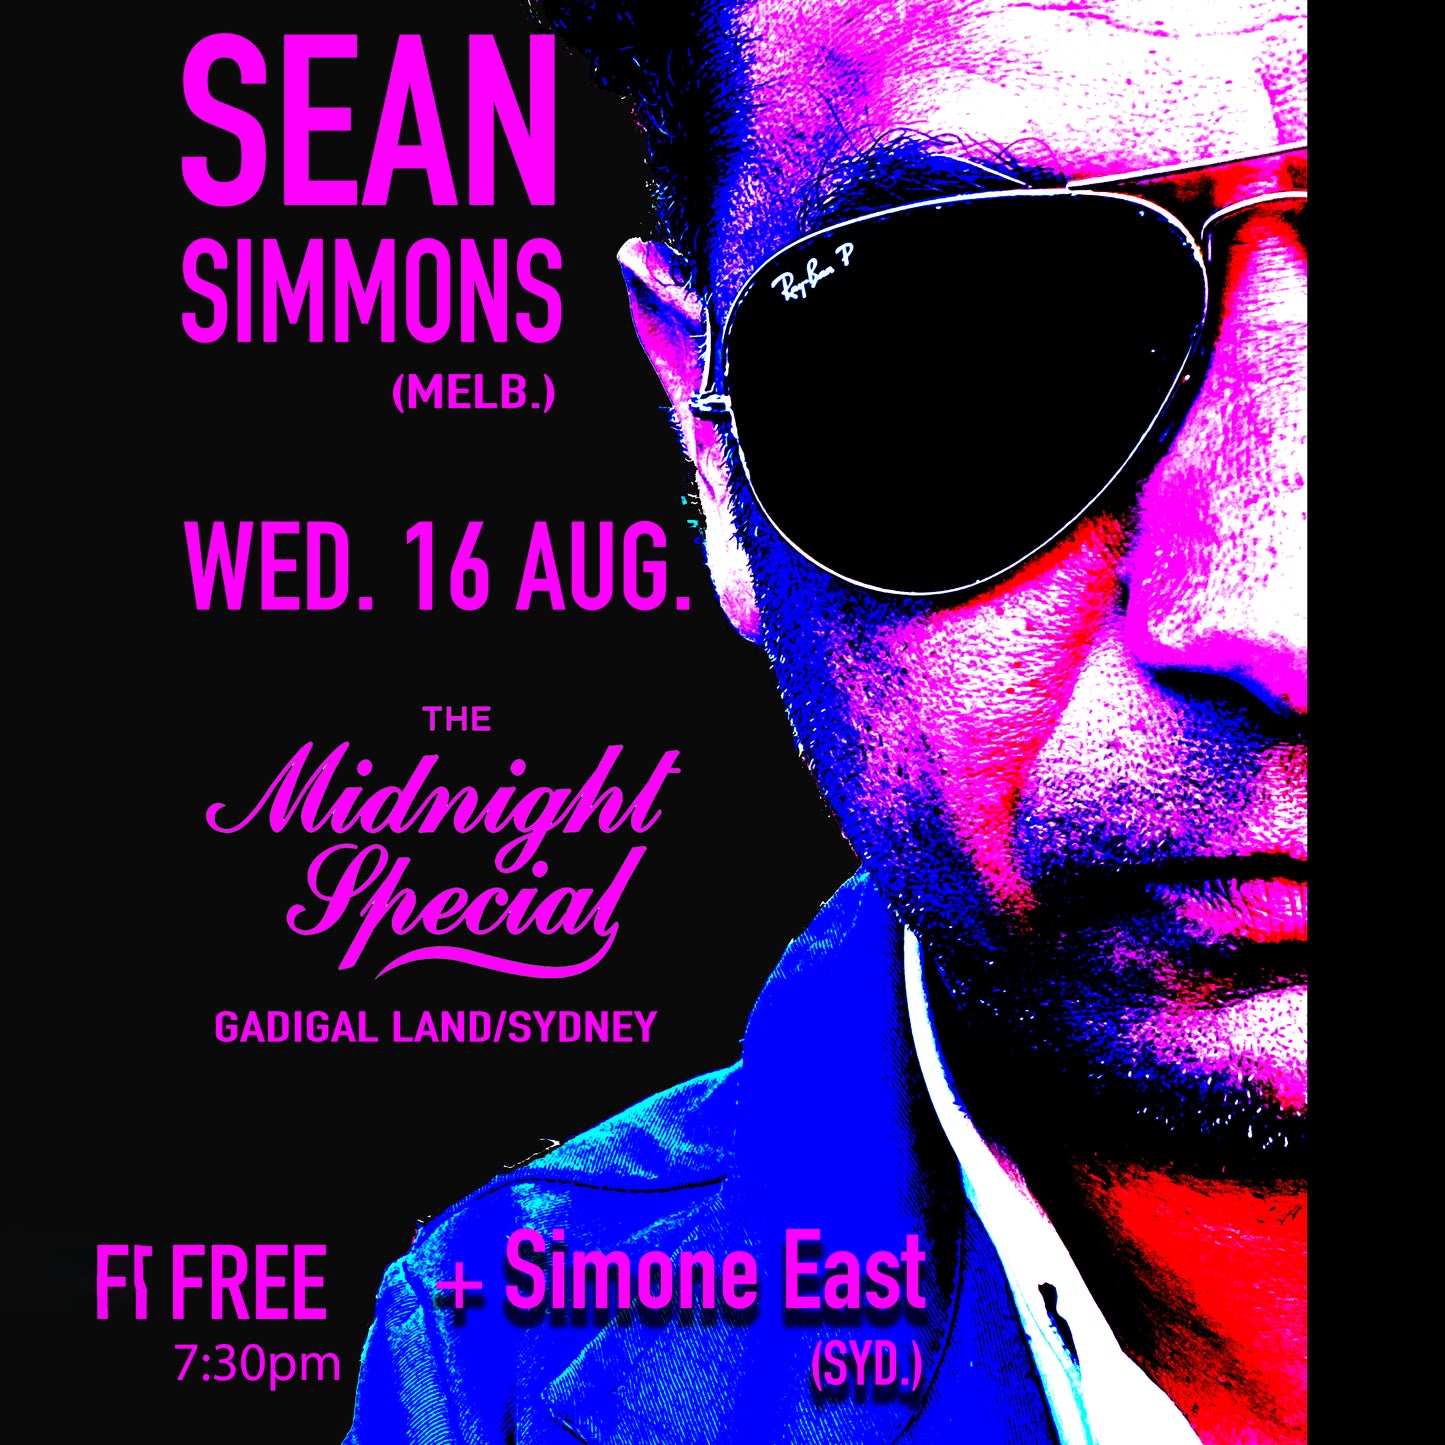 Sean Simmons with special guest Simone East